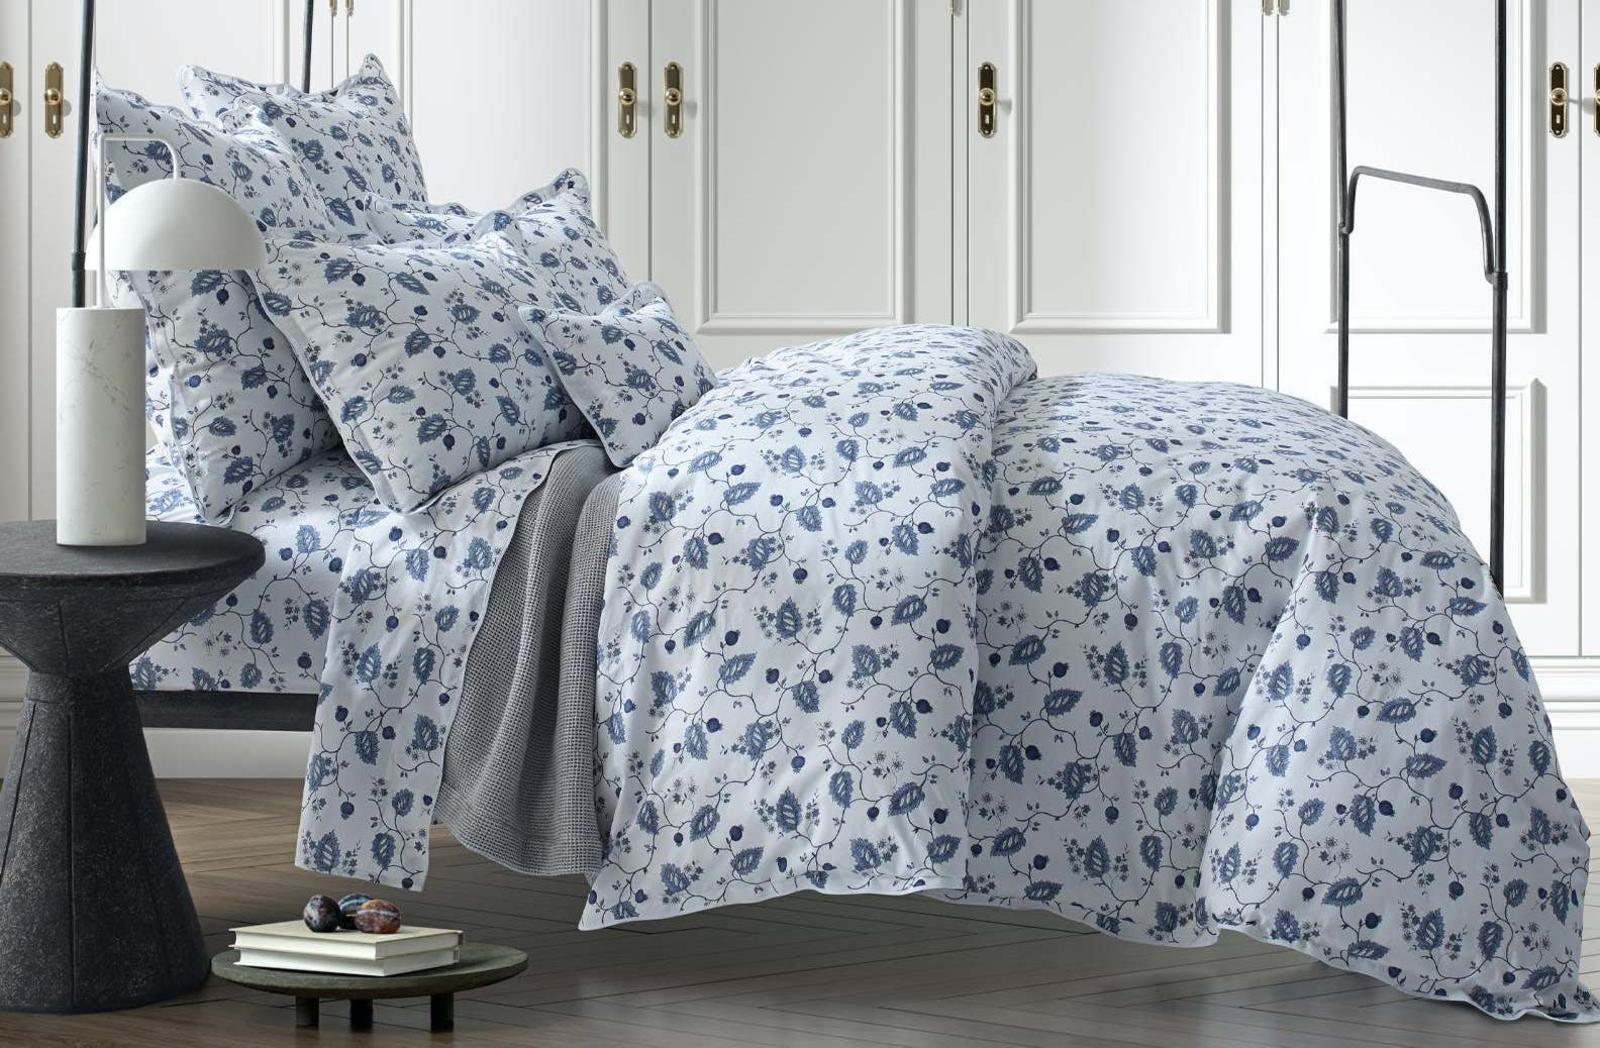 Luxury Bedding and Bath Store - Block Bros. At Home – Block Bros. at Home